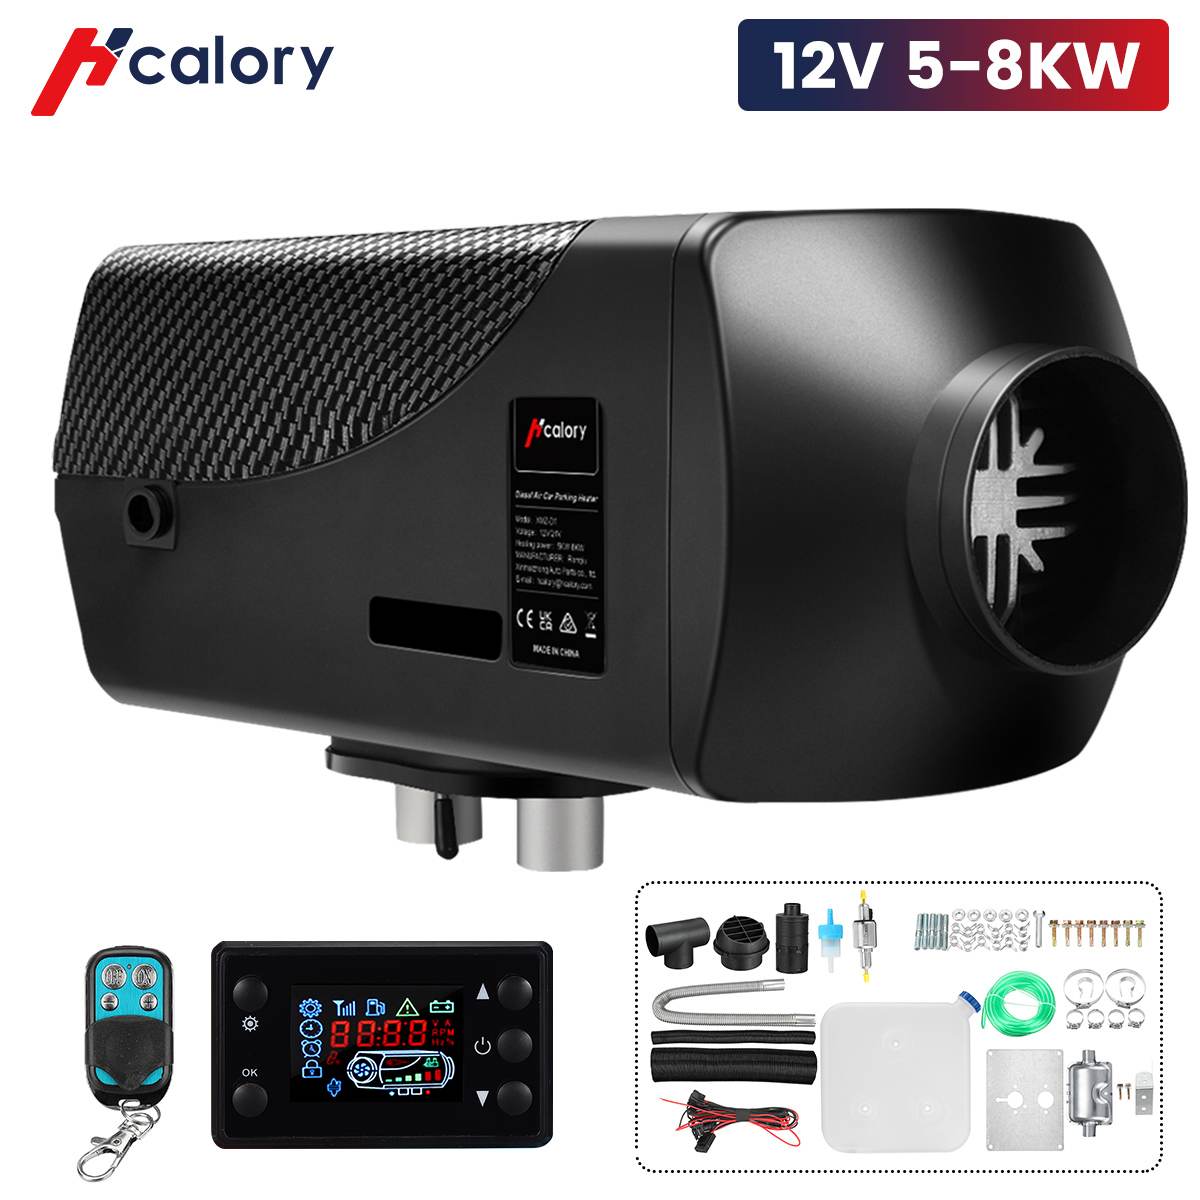 Hcalory Car Heater 5-8KW 12V Air Diesels Heater Parking Heater With Remote Control LCD Monitor for RV Motorhome Trucks Boats